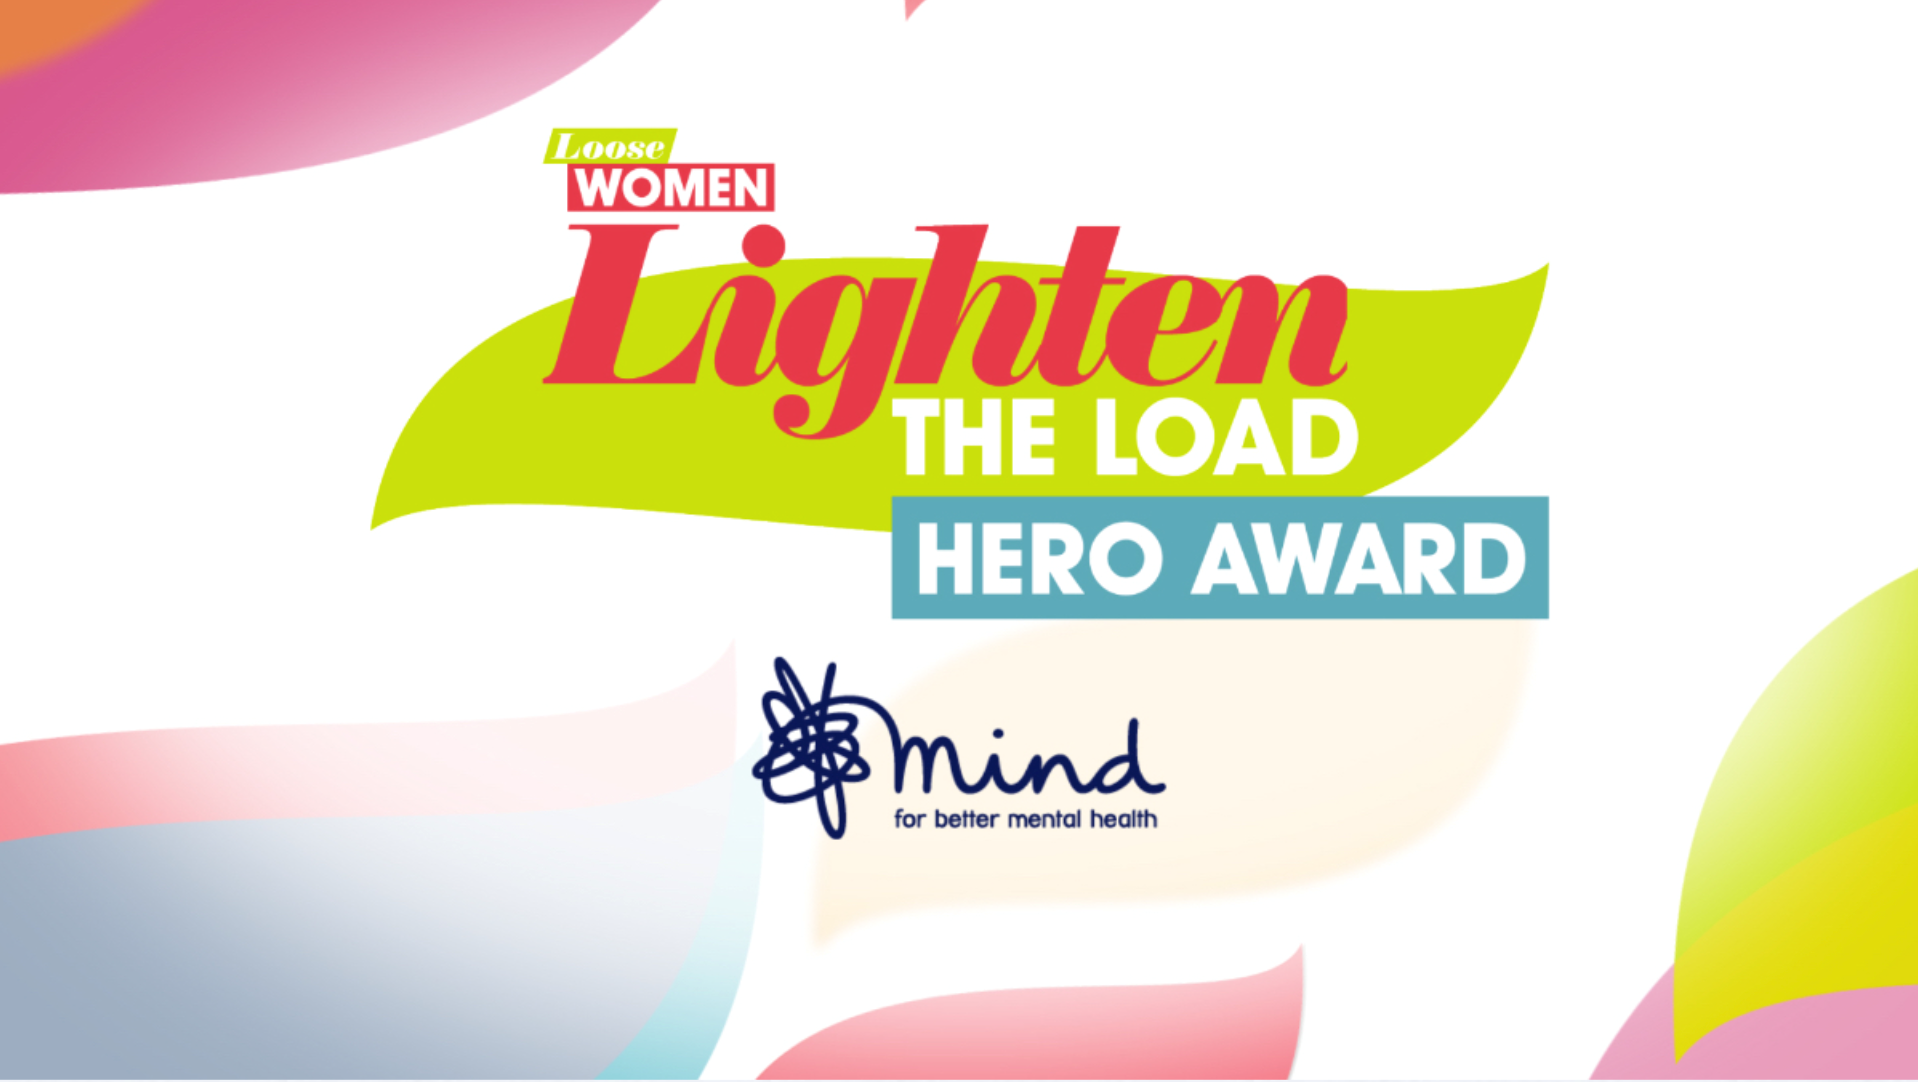 The logo for Loose Women Lighten The Load Hero Award in collaboration with Mind